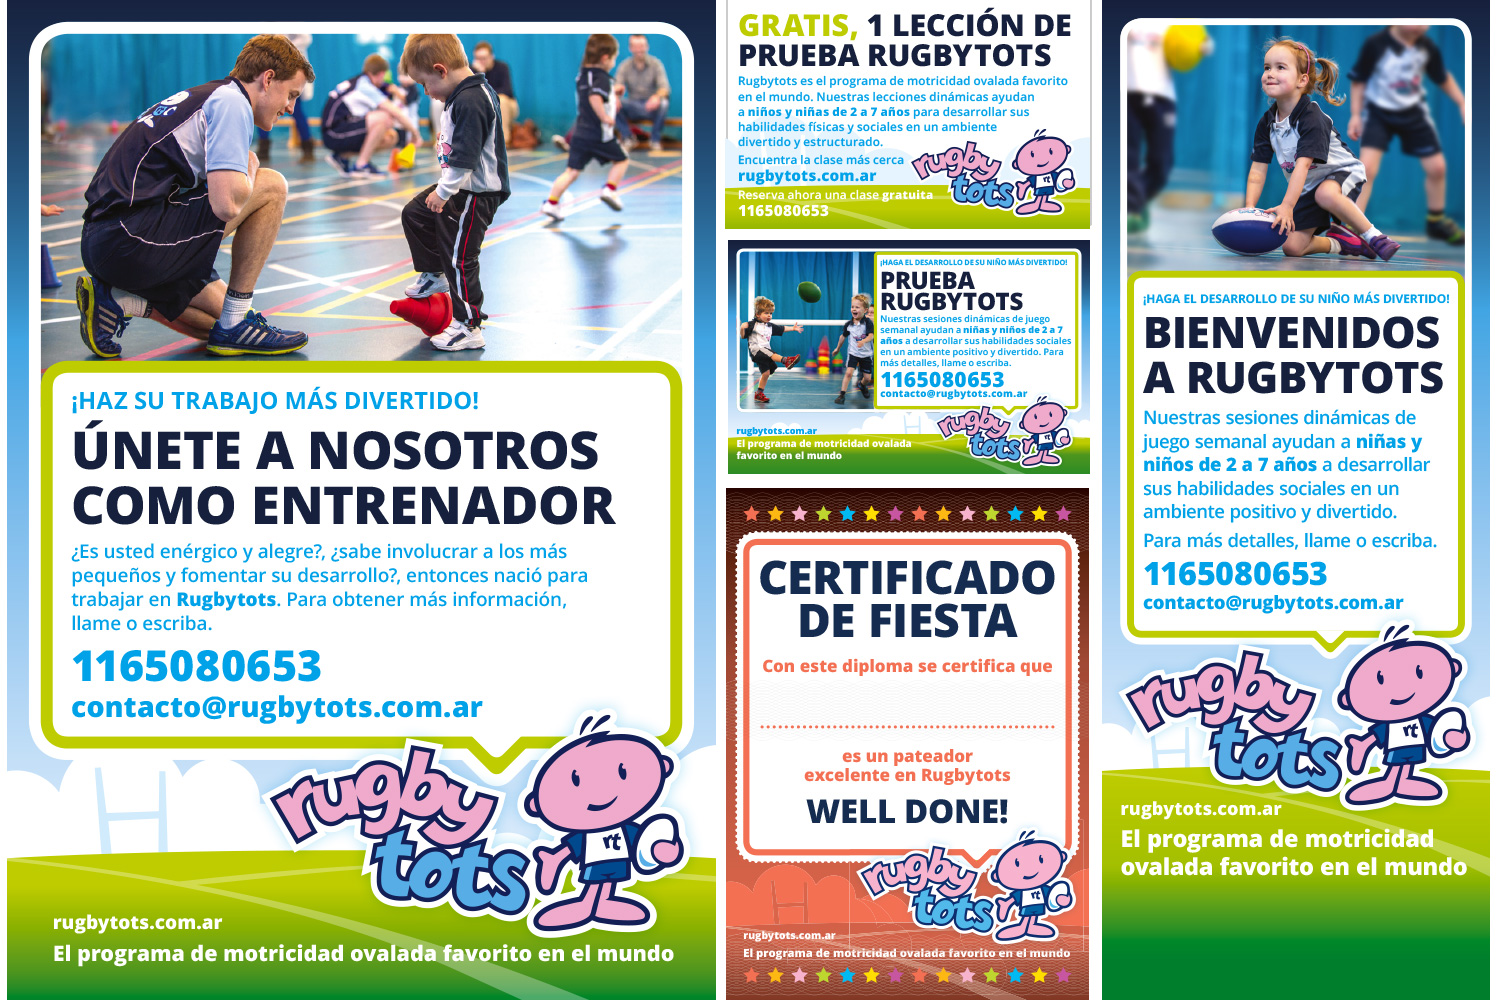 Rugbytots marketing materials in Spanish